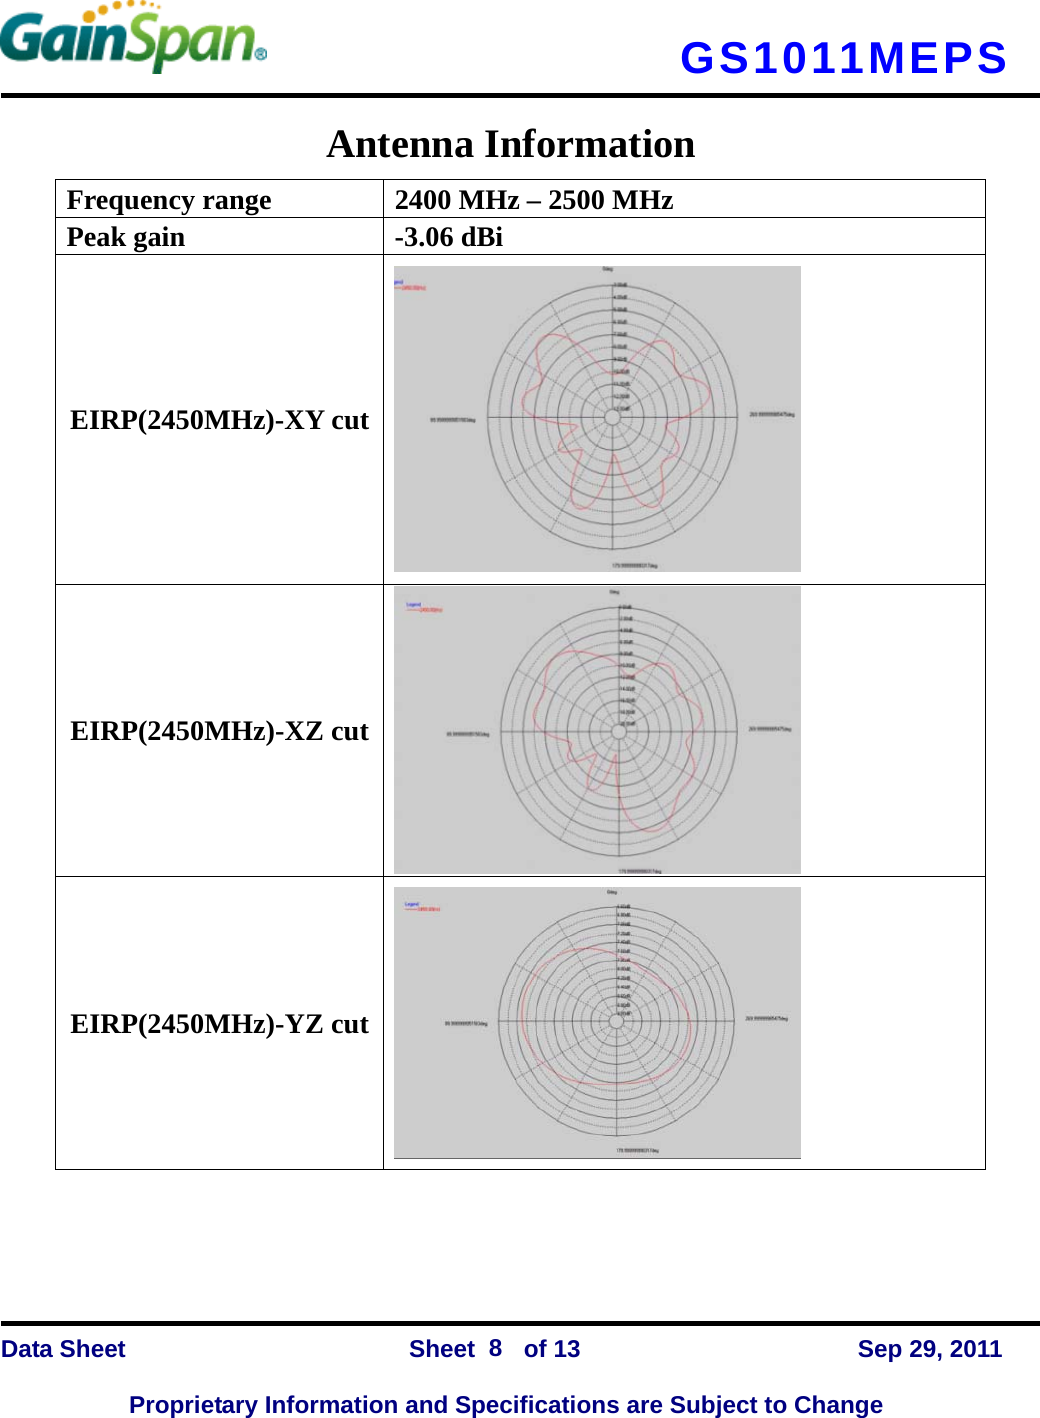   GS1011MEPS    Data Sheet                Sheet    of 13      Sep 29, 2011  Proprietary Information and Specifications are Subject to Change 8 Antenna Information Frequency range      2400 MHz – 2500 MHz Peak gain  -3.06 dBi EIRP(2450MHz)-XY cut  EIRP(2450MHz)-XZ cut  EIRP(2450MHz)-YZ cut  